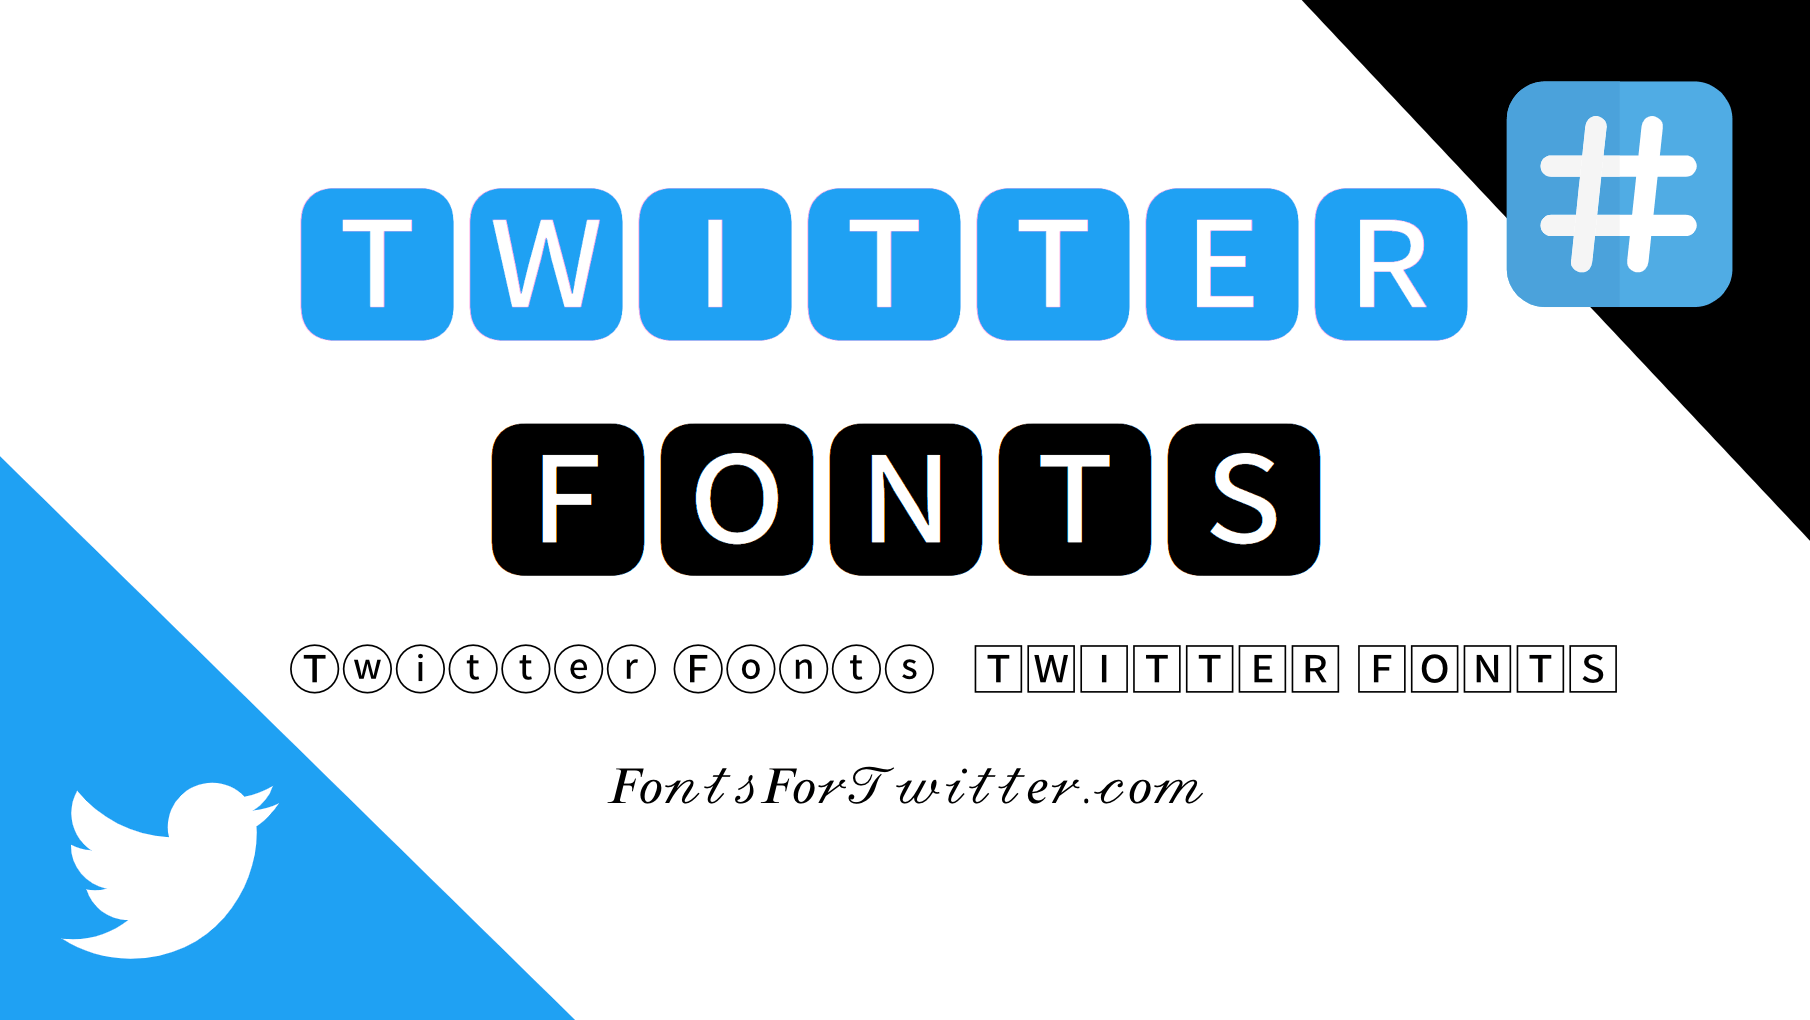 copy and paste fonts aesthetic symbols